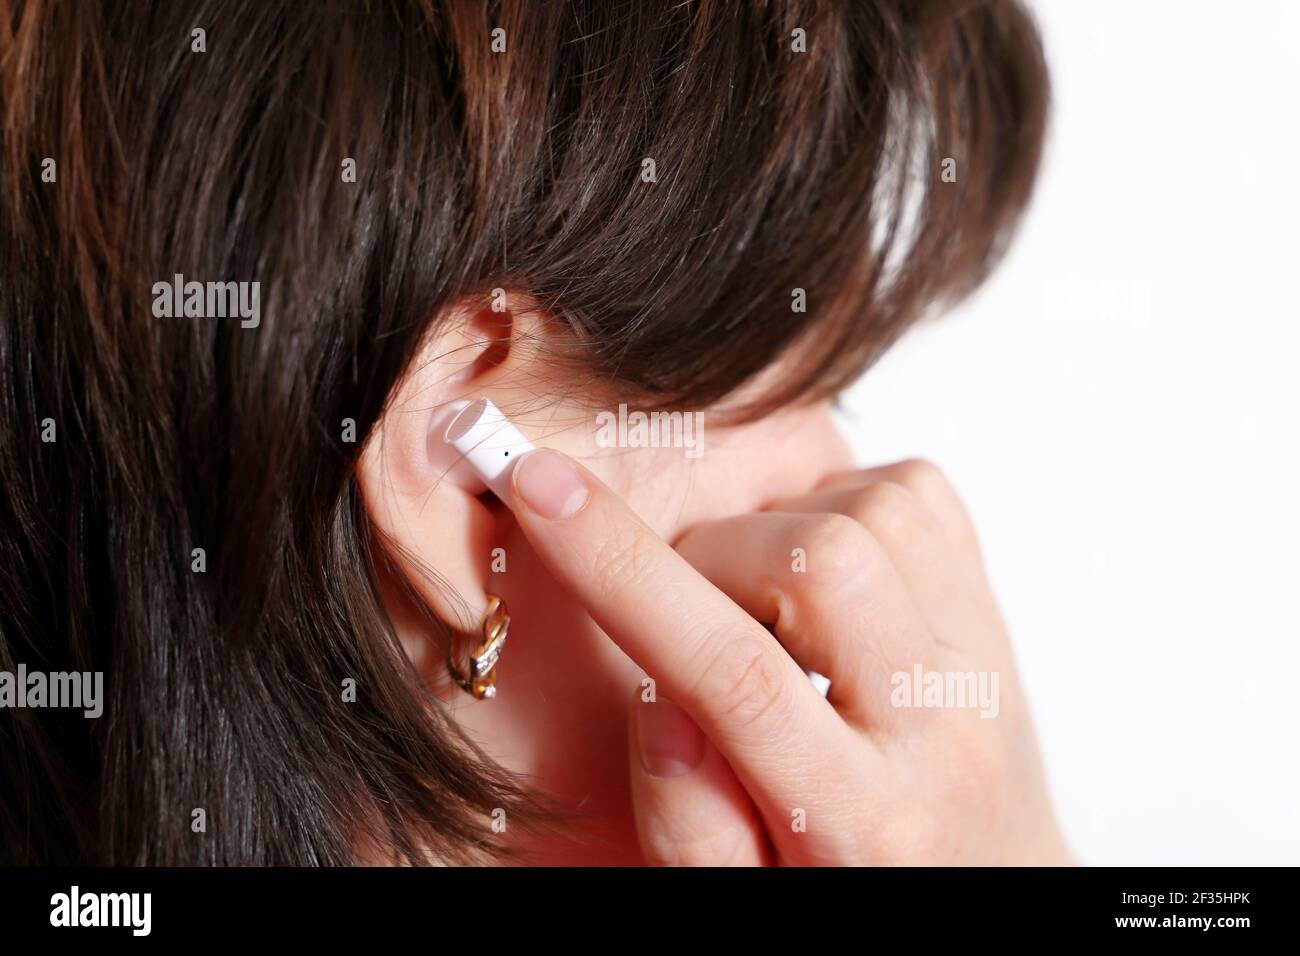 Woman touching wireless earphone in the ear. Headset, listening to music and voice call concept Stock Photo